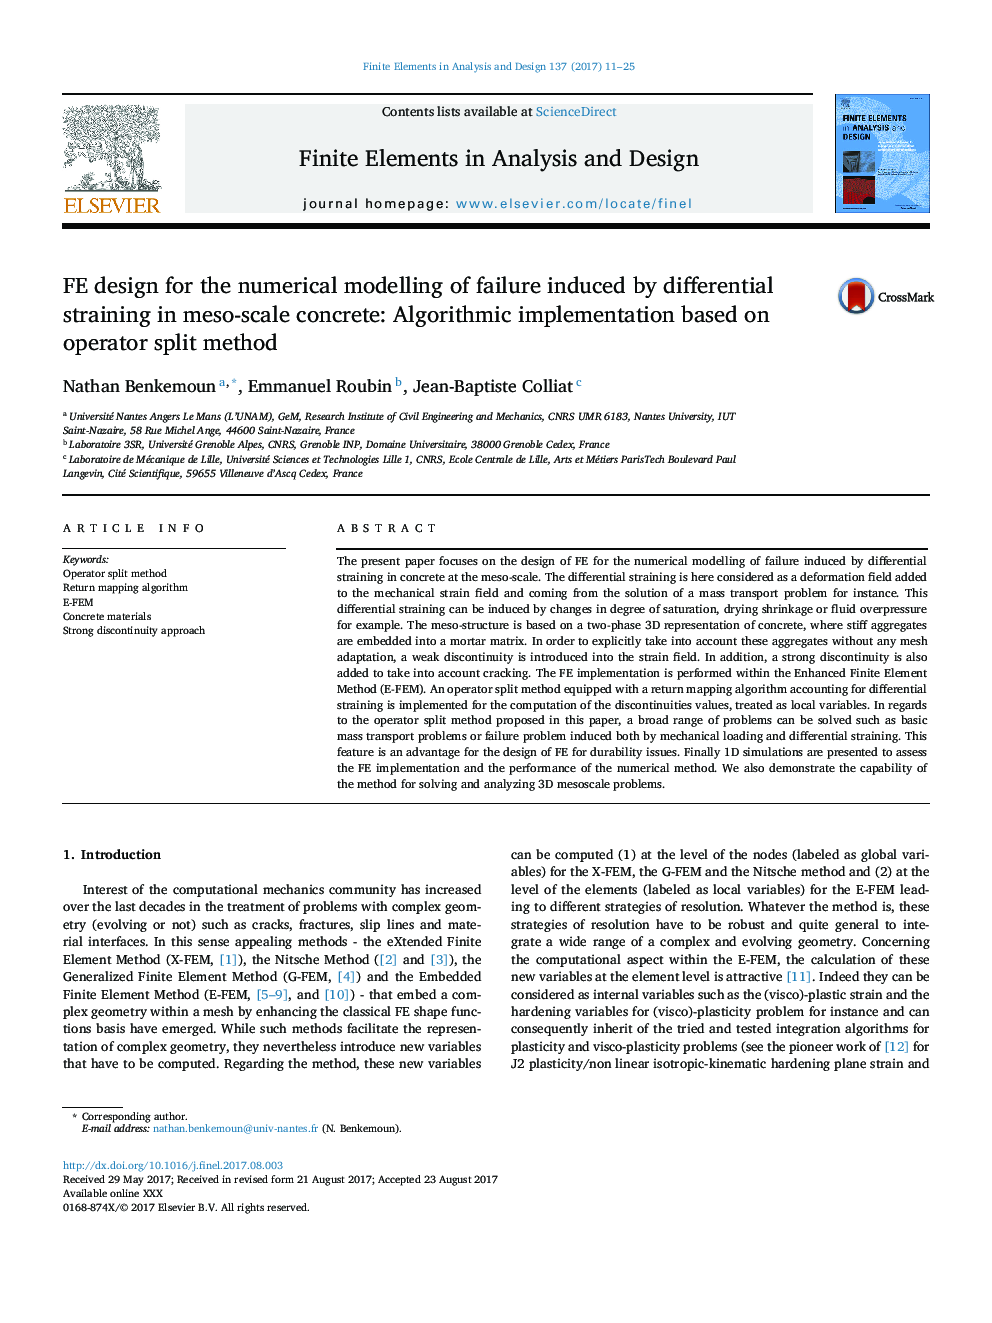 FE design for the numerical modelling of failure induced by differential straining in meso-scale concrete: Algorithmic implementation based on operator split method